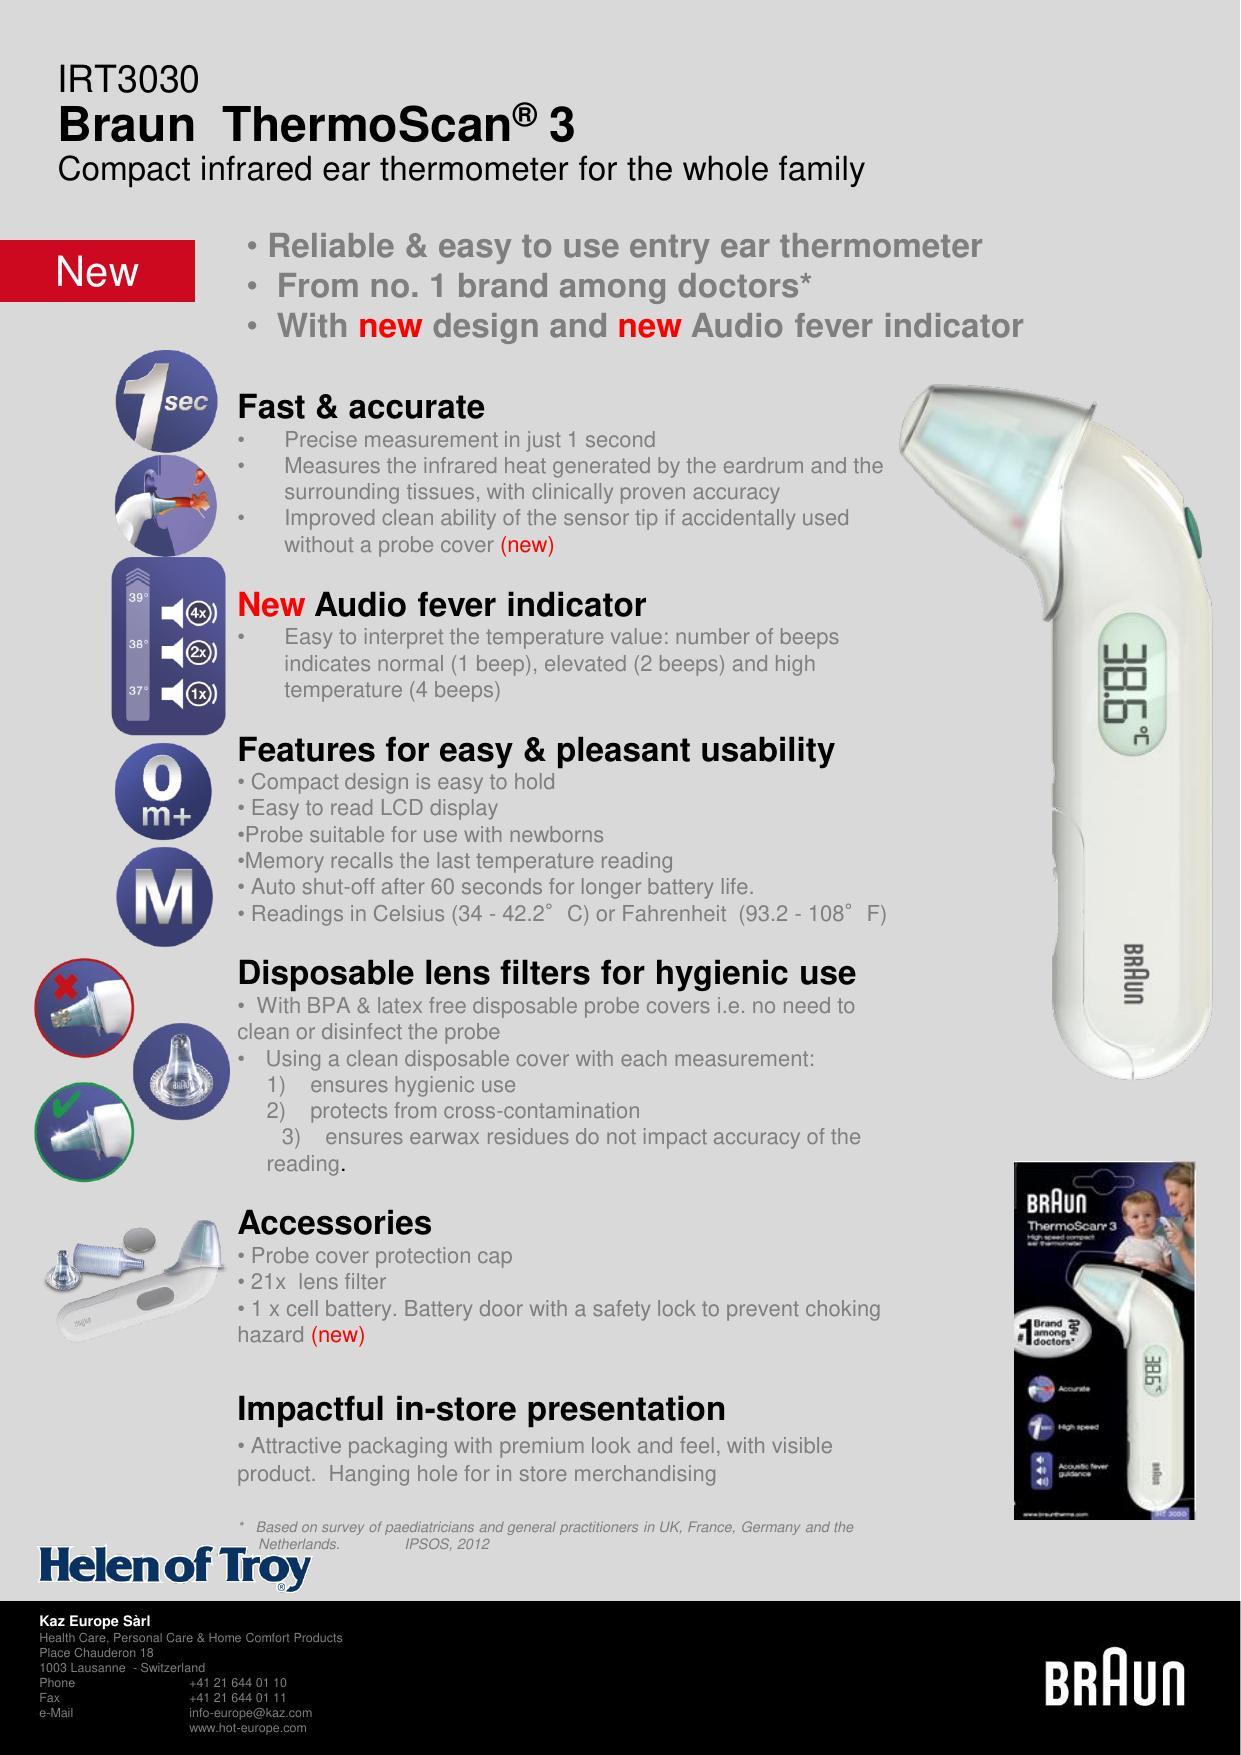 braun-thermoscan-3-compact-infrared-ear-thermometer-for-the-whole-family-user-manual.pdf